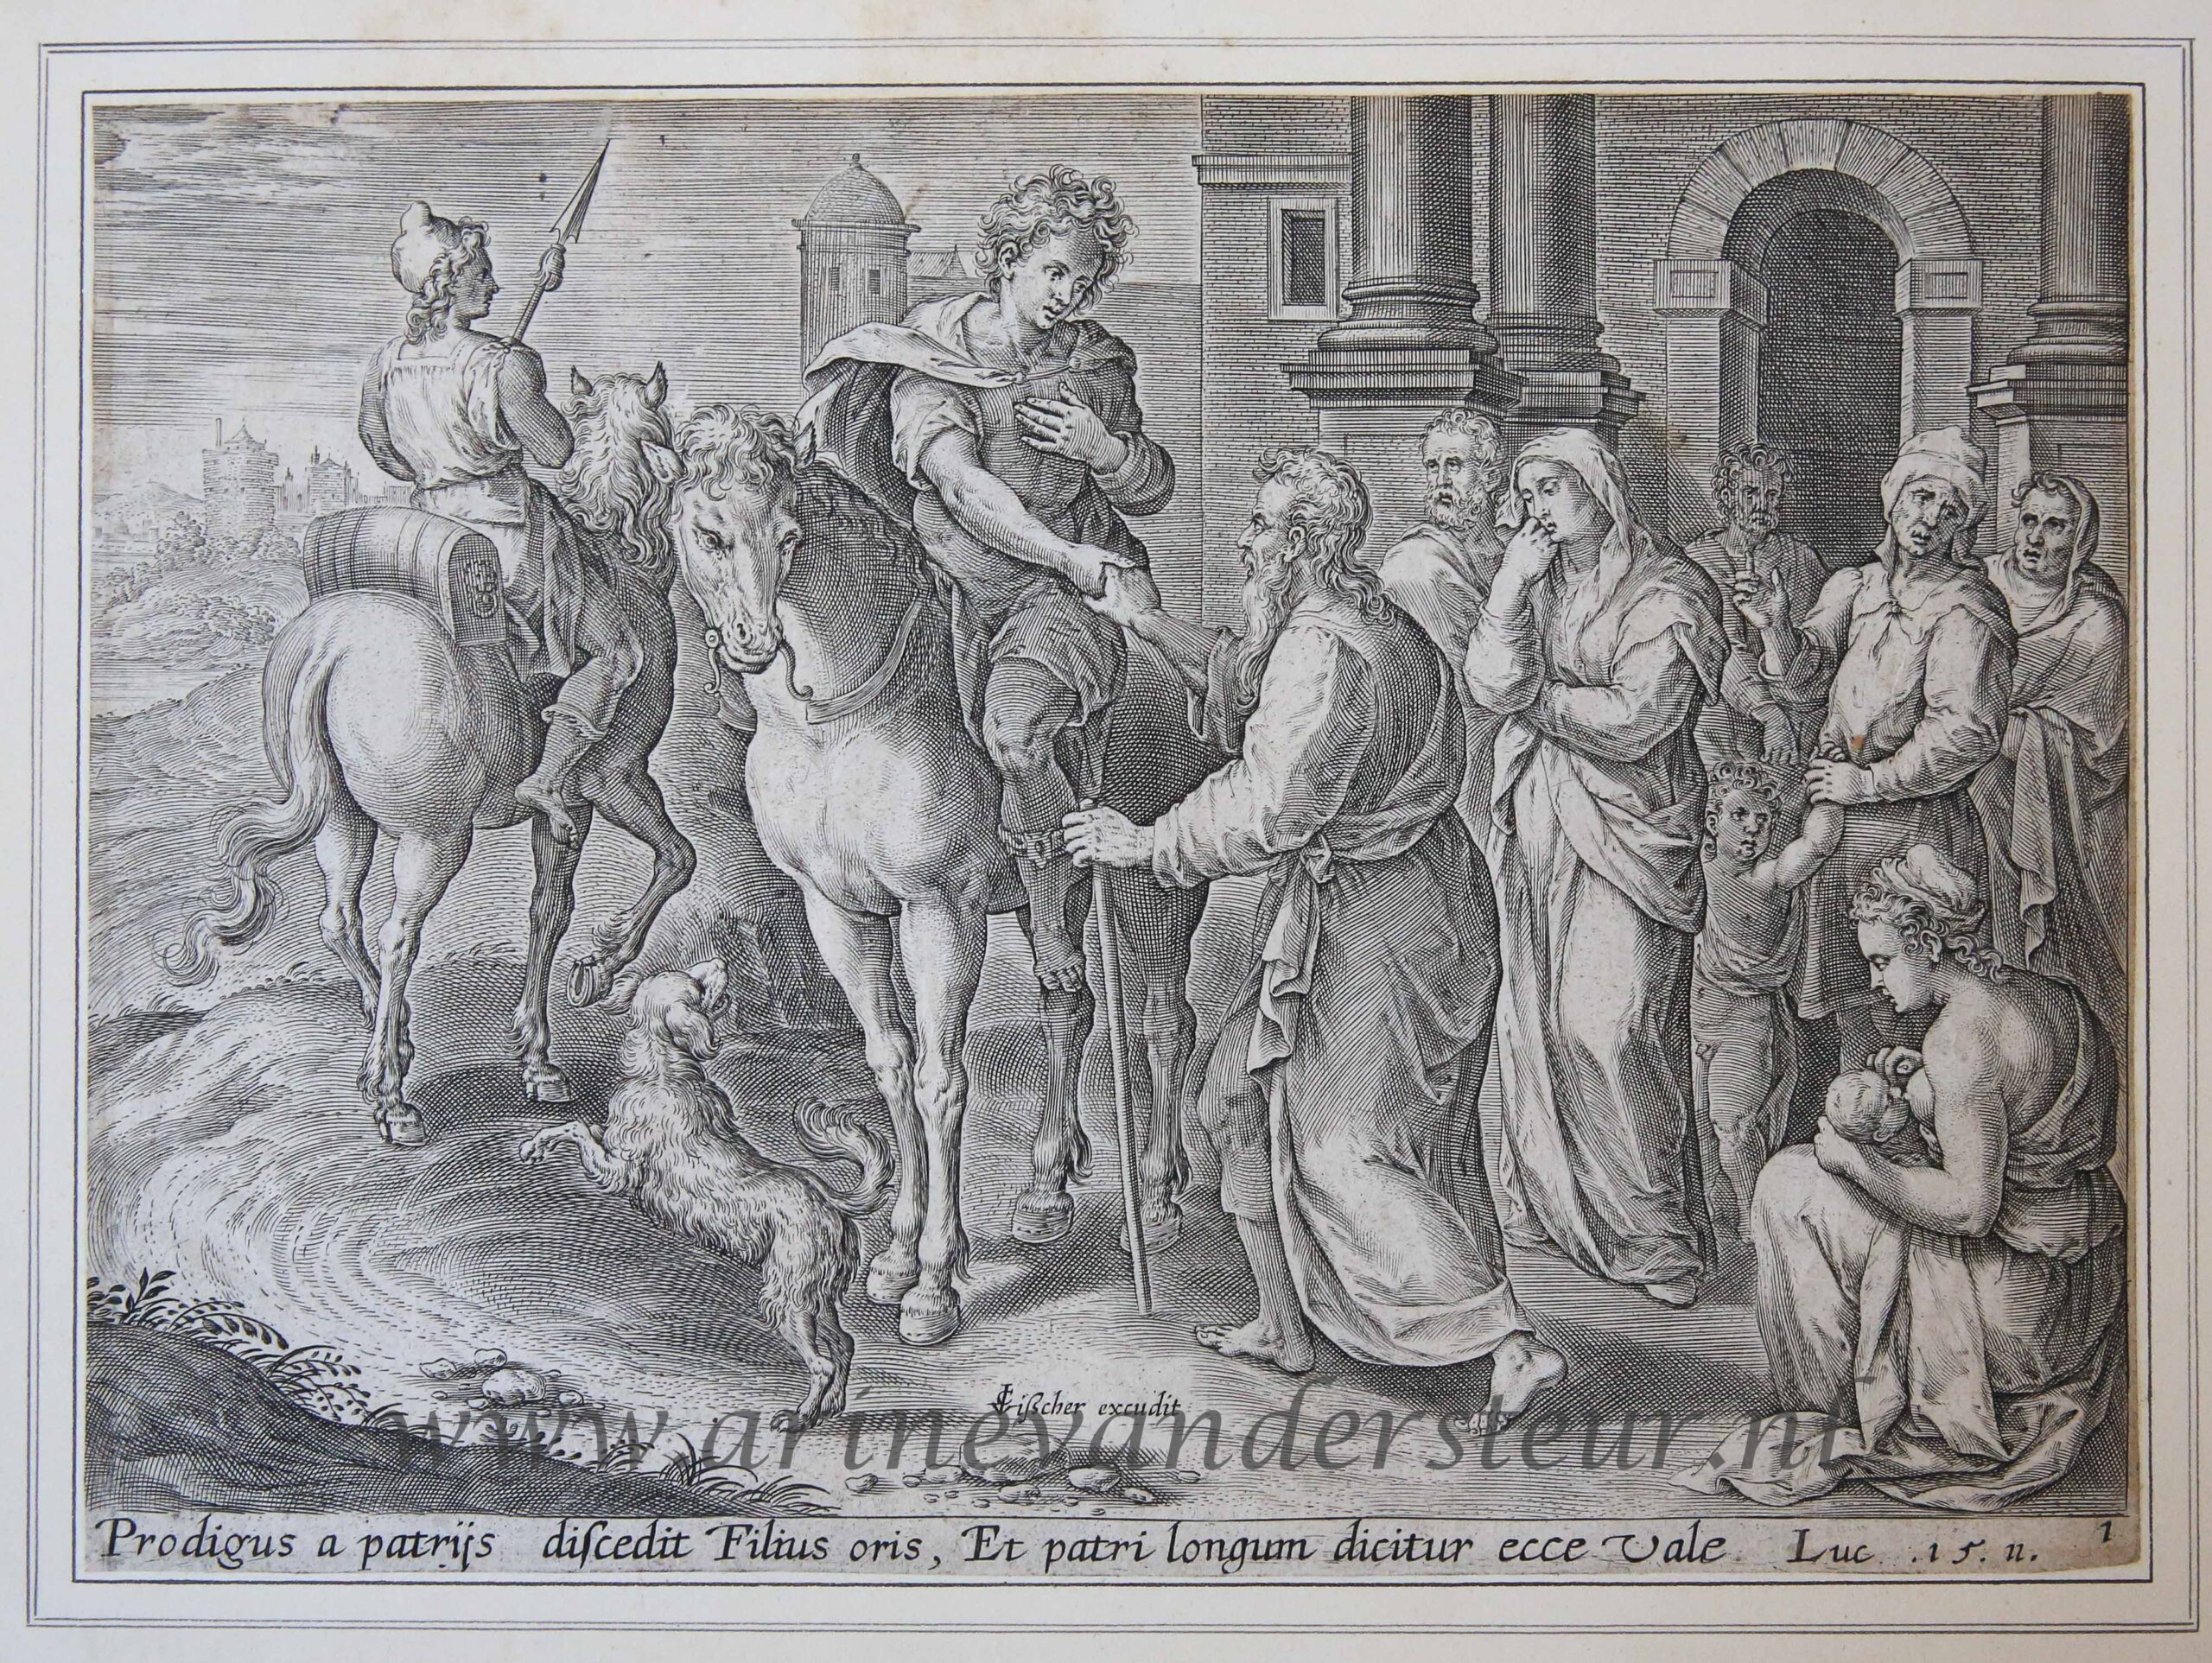 [Antique print, engraving] The Prodigal Son leaves the house of the father / De verloren zoon neemt afscheid van zijn vader [Set of 4 plates: The parable of the Prodigal Son], published 1643, 1 p.